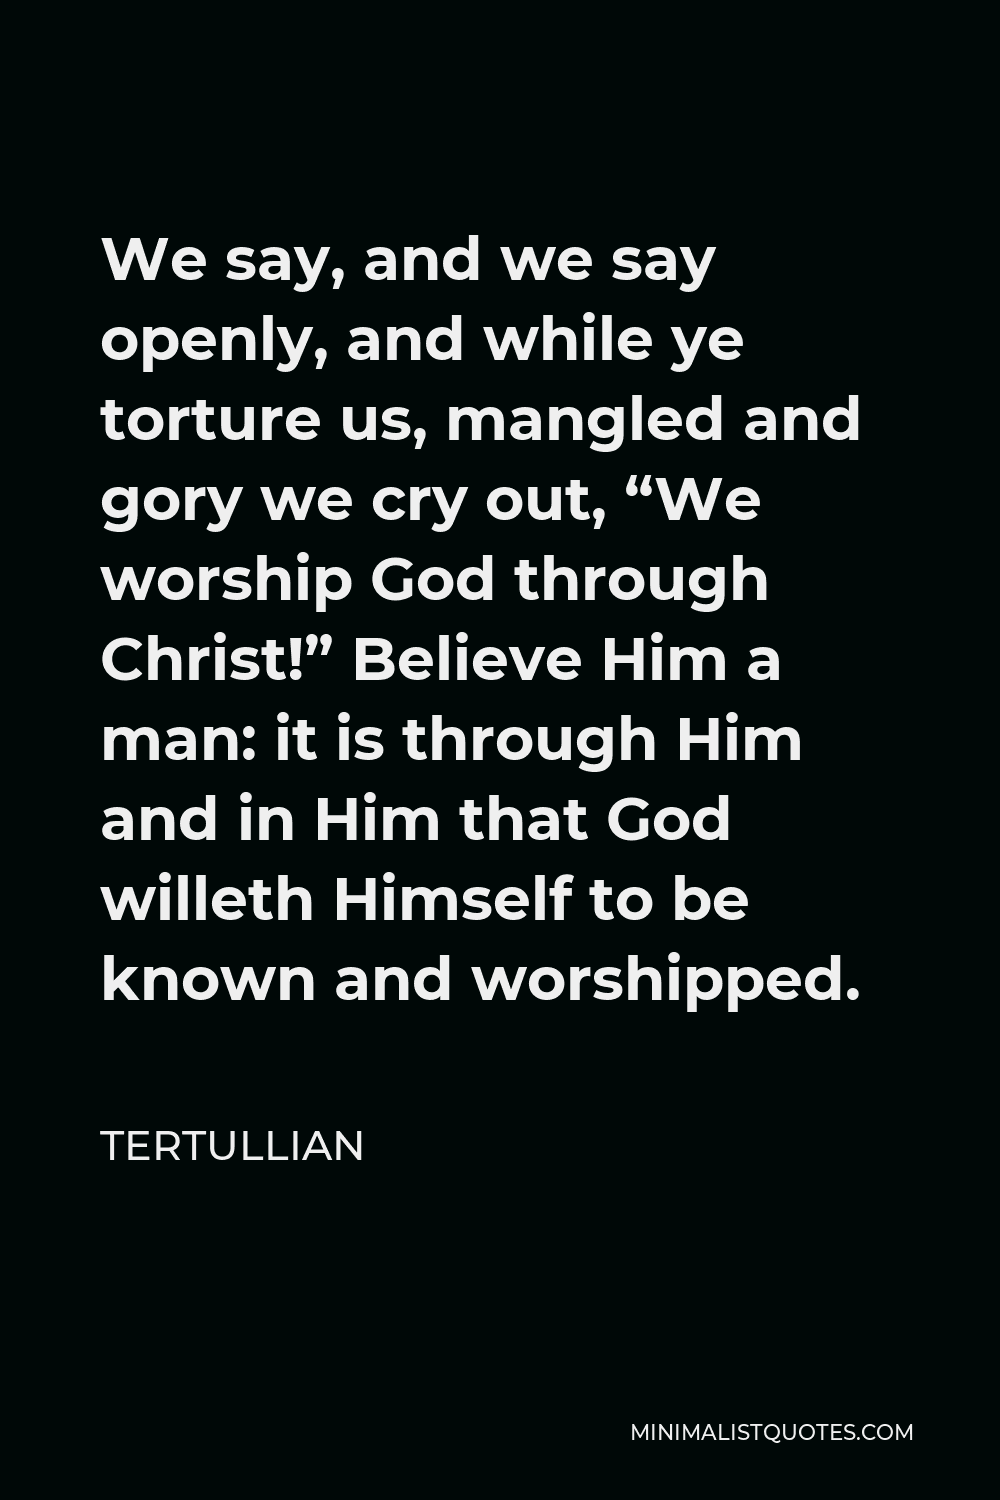 Tertullian Quote - We say, and we say openly, and while ye torture us, mangled and gory we cry out, “We worship God through Christ!” Believe Him a man: it is through Him and in Him that God willeth Himself to be known and worshipped.